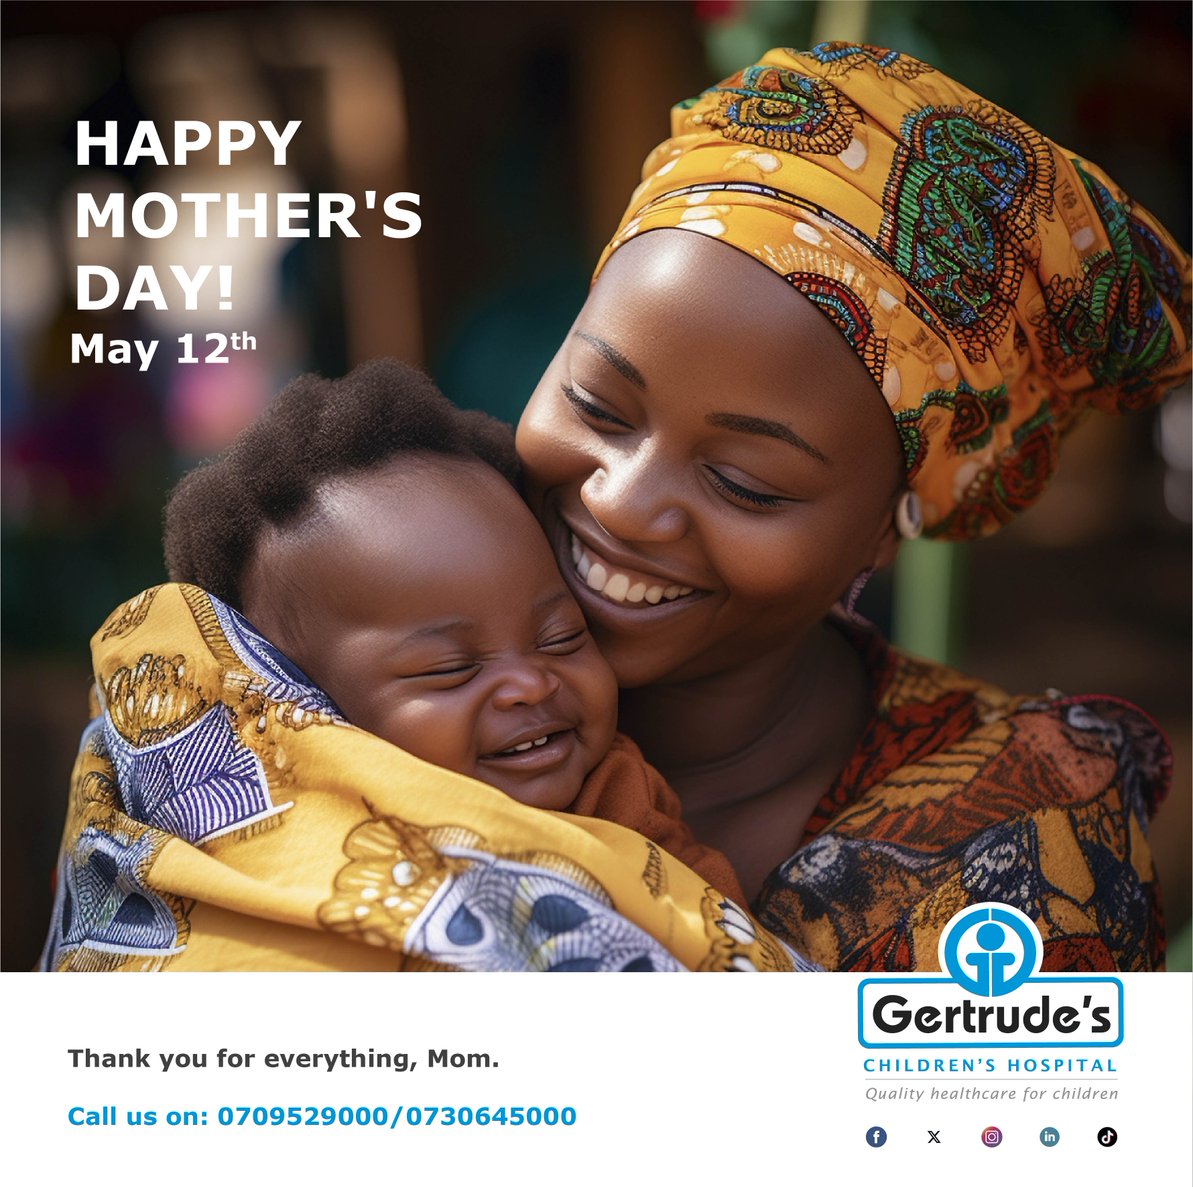 Happy Mother's Day to all the incredible moms out there! Your love, strength, and sacrifices are unmatched. Today, we celebrate you and all that you do. Call 0709529000. #GertrudesKe #GertrudesCares #MothersDay #MomLove